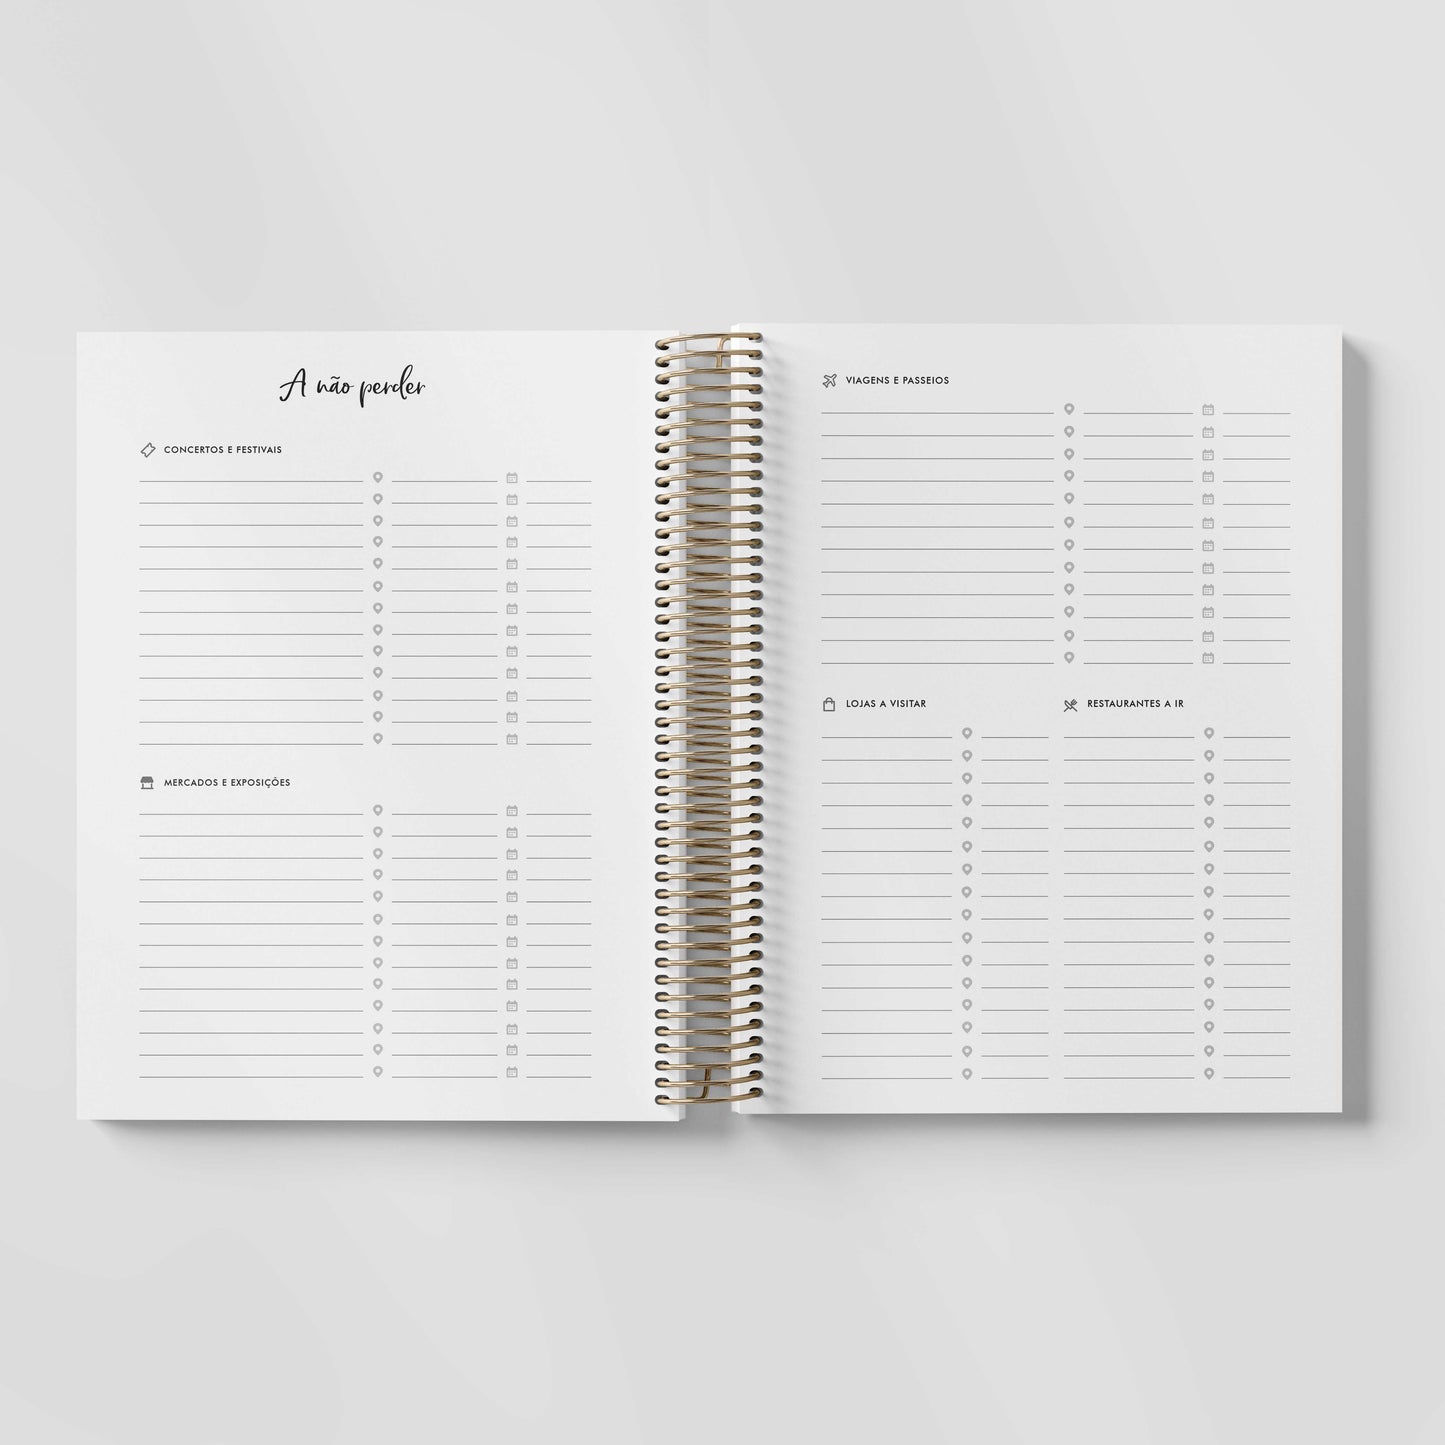 STRIPES + COSMIC | LIFE PLANNER 2024 * 12 MONTH AGENDA * ESPECIAL HOLIDAY SALE *